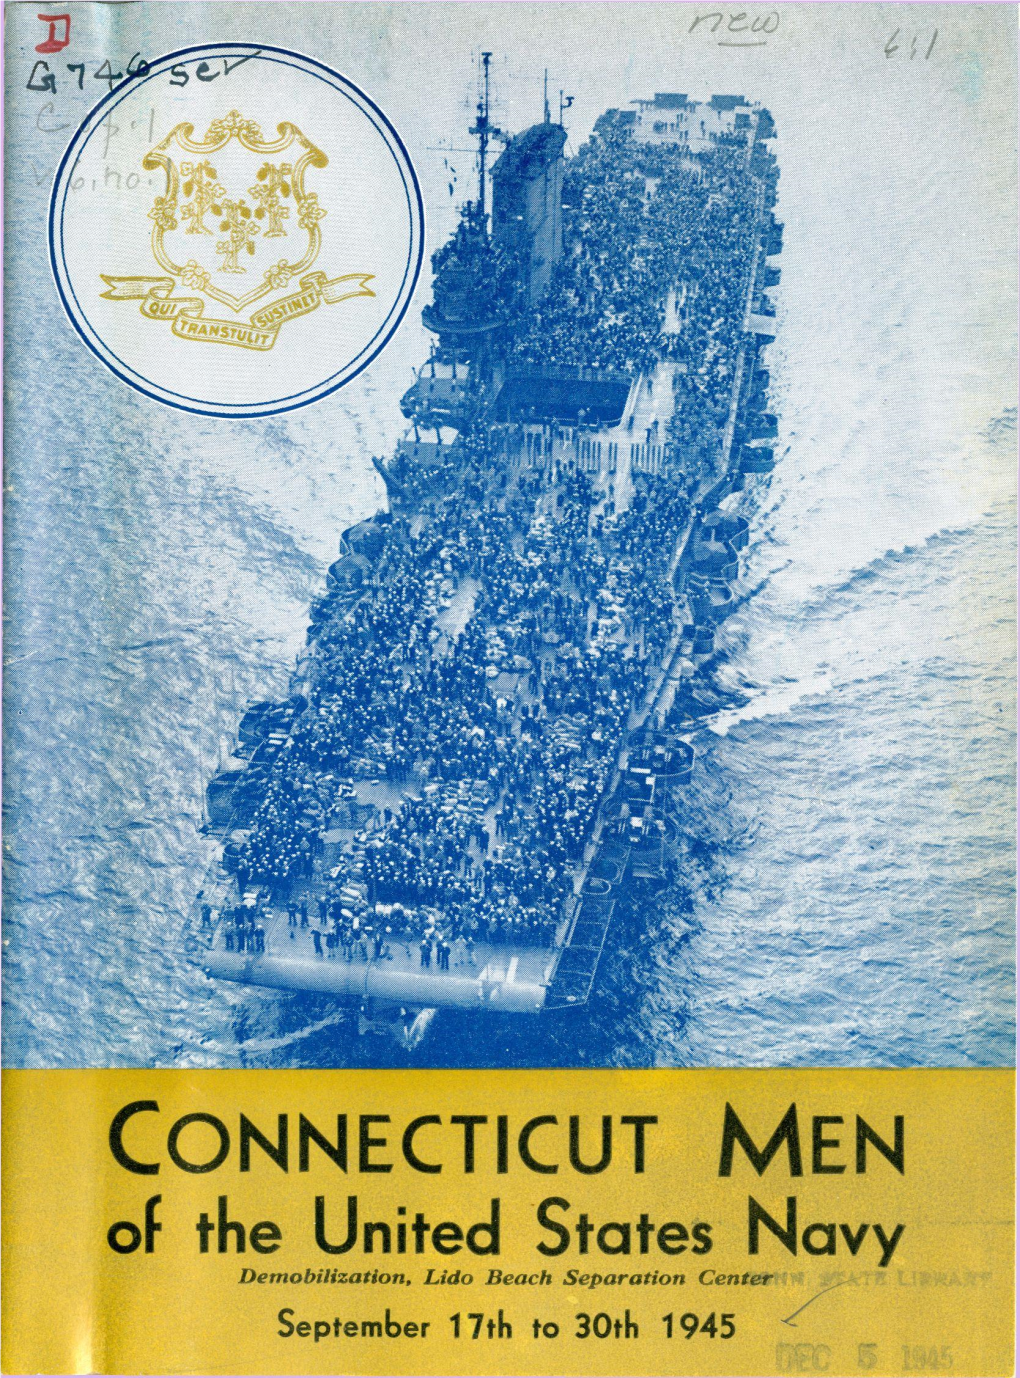 CONNECTICUT MEN of the United States Navy Demobilization, Lido Beach Separation Center September 17Th to 30Th 1945 the MEN ARE COMING HOME